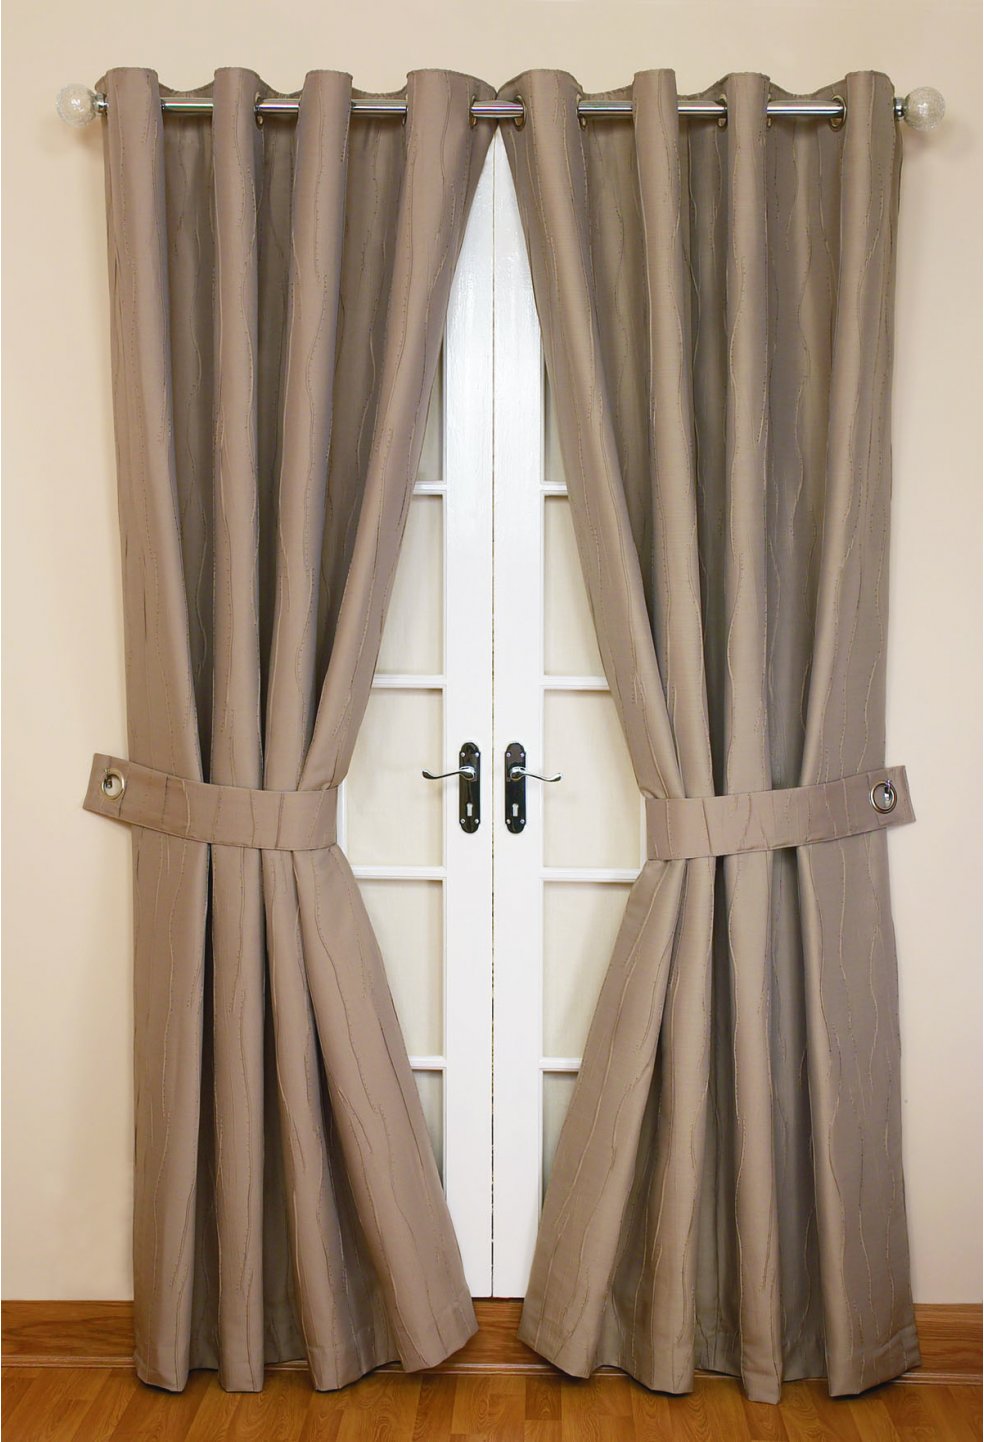 Linen Curtains in Curtain